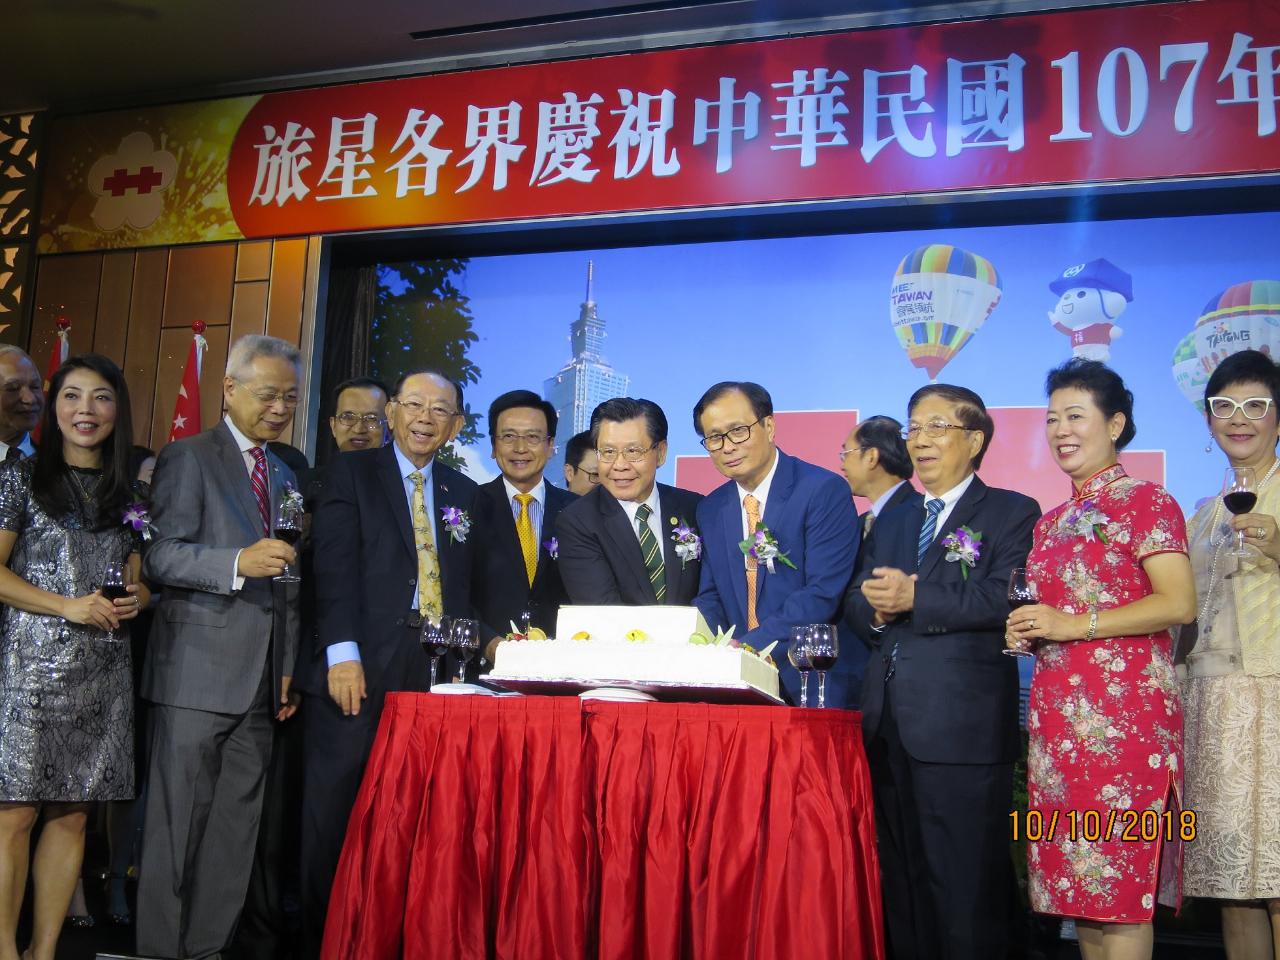 Representative Francis Liang (fifth from left) and VIPs onstage for the cake-cutting during the dinner reception to celebrate the ROC 107th Double Tenth National Day.